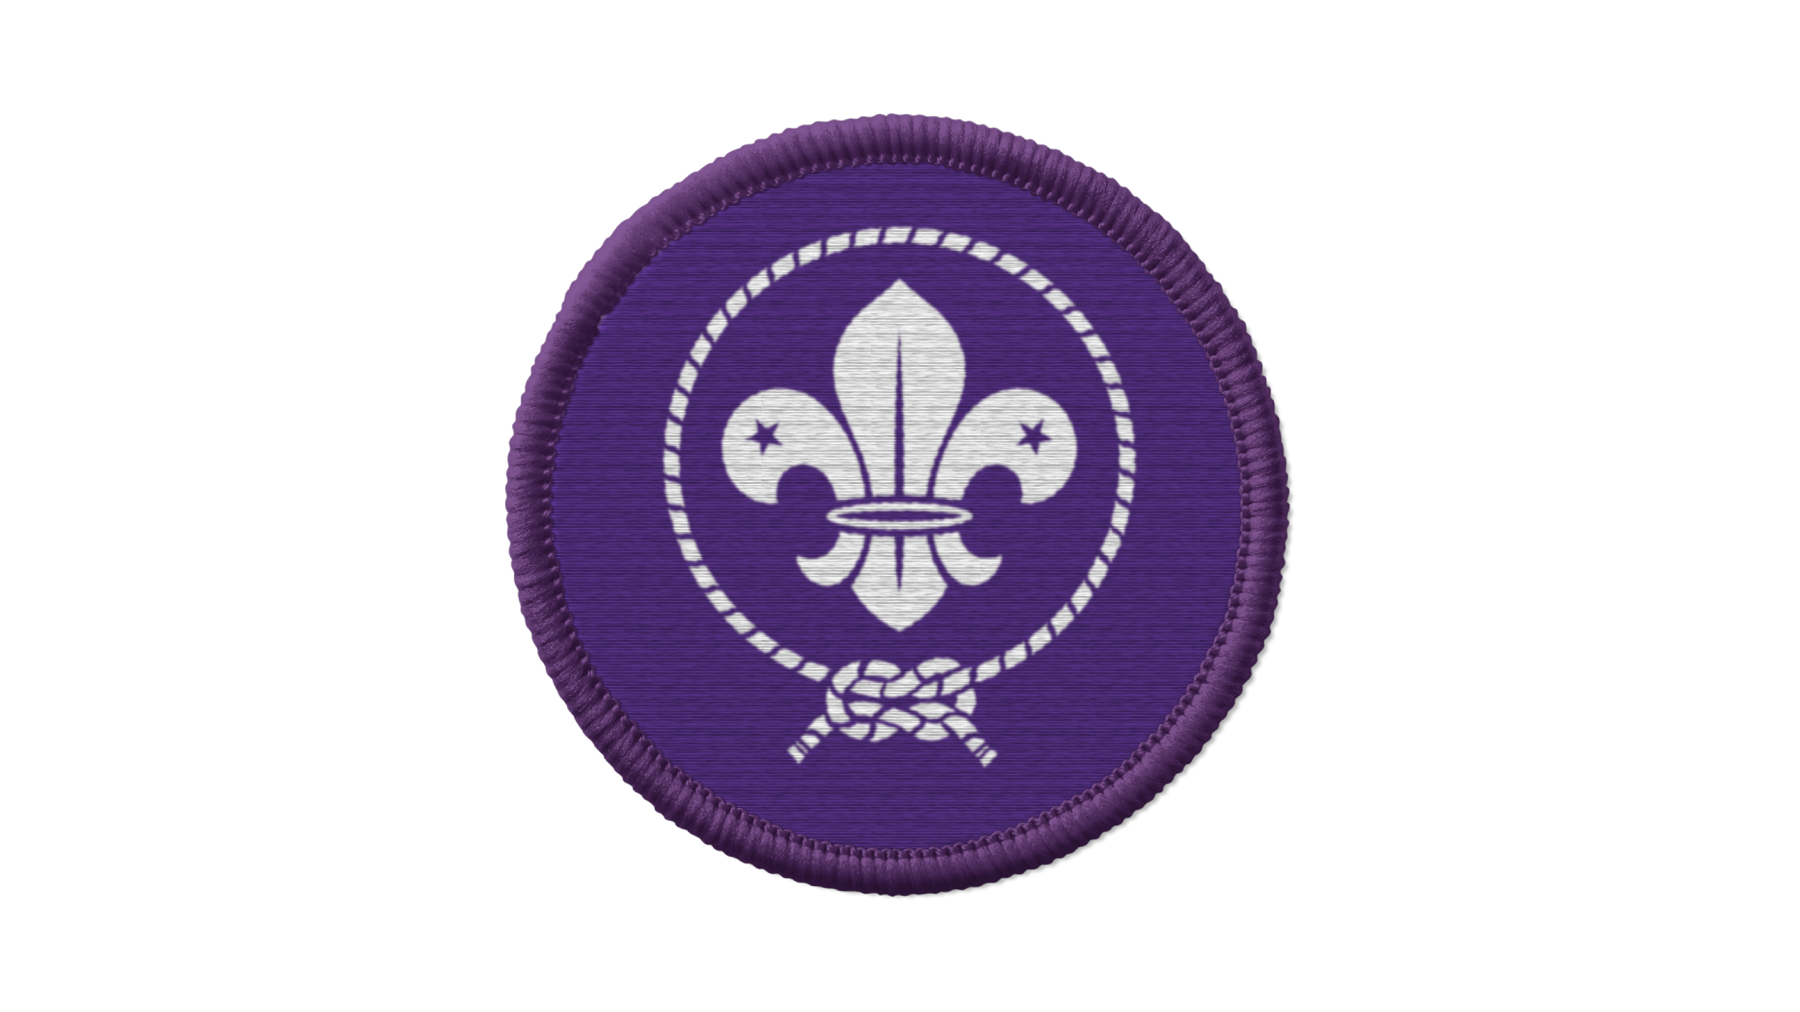 The textured badge image for the Membership Award.